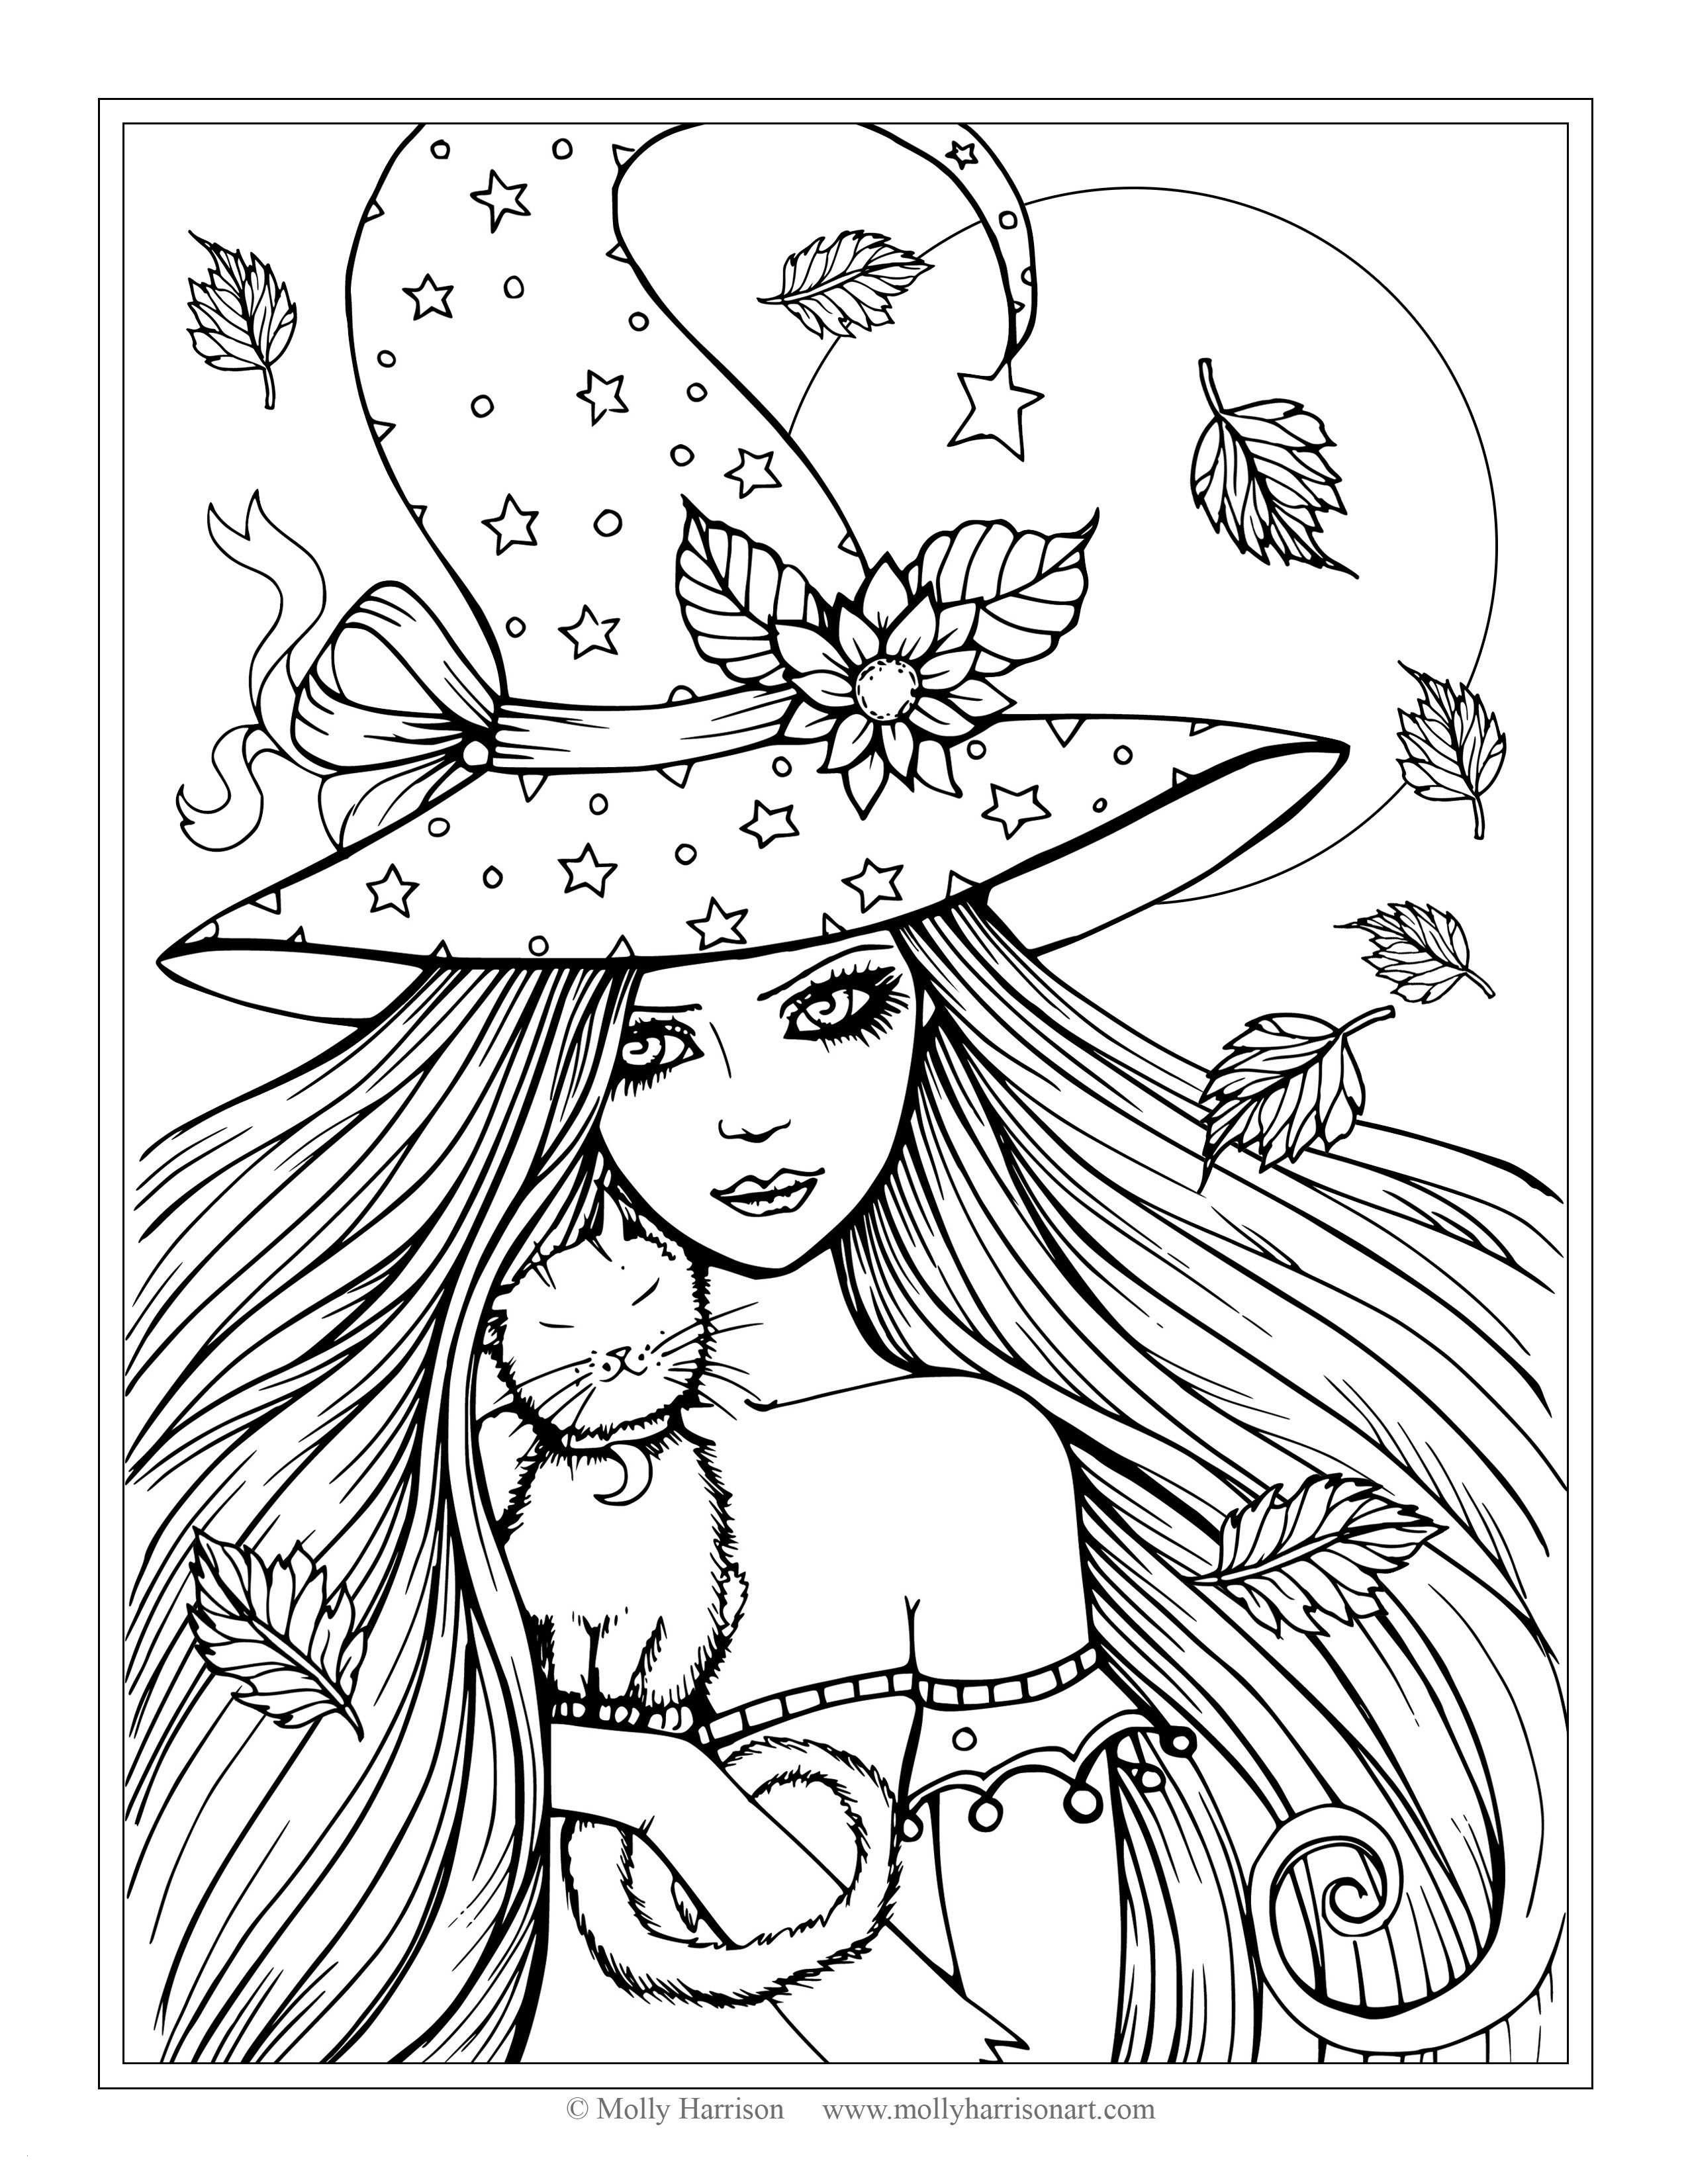 Coloring Cat Fresh Cool Coloring Page Unique Witch Coloring Pages New Crayola Pages 0d